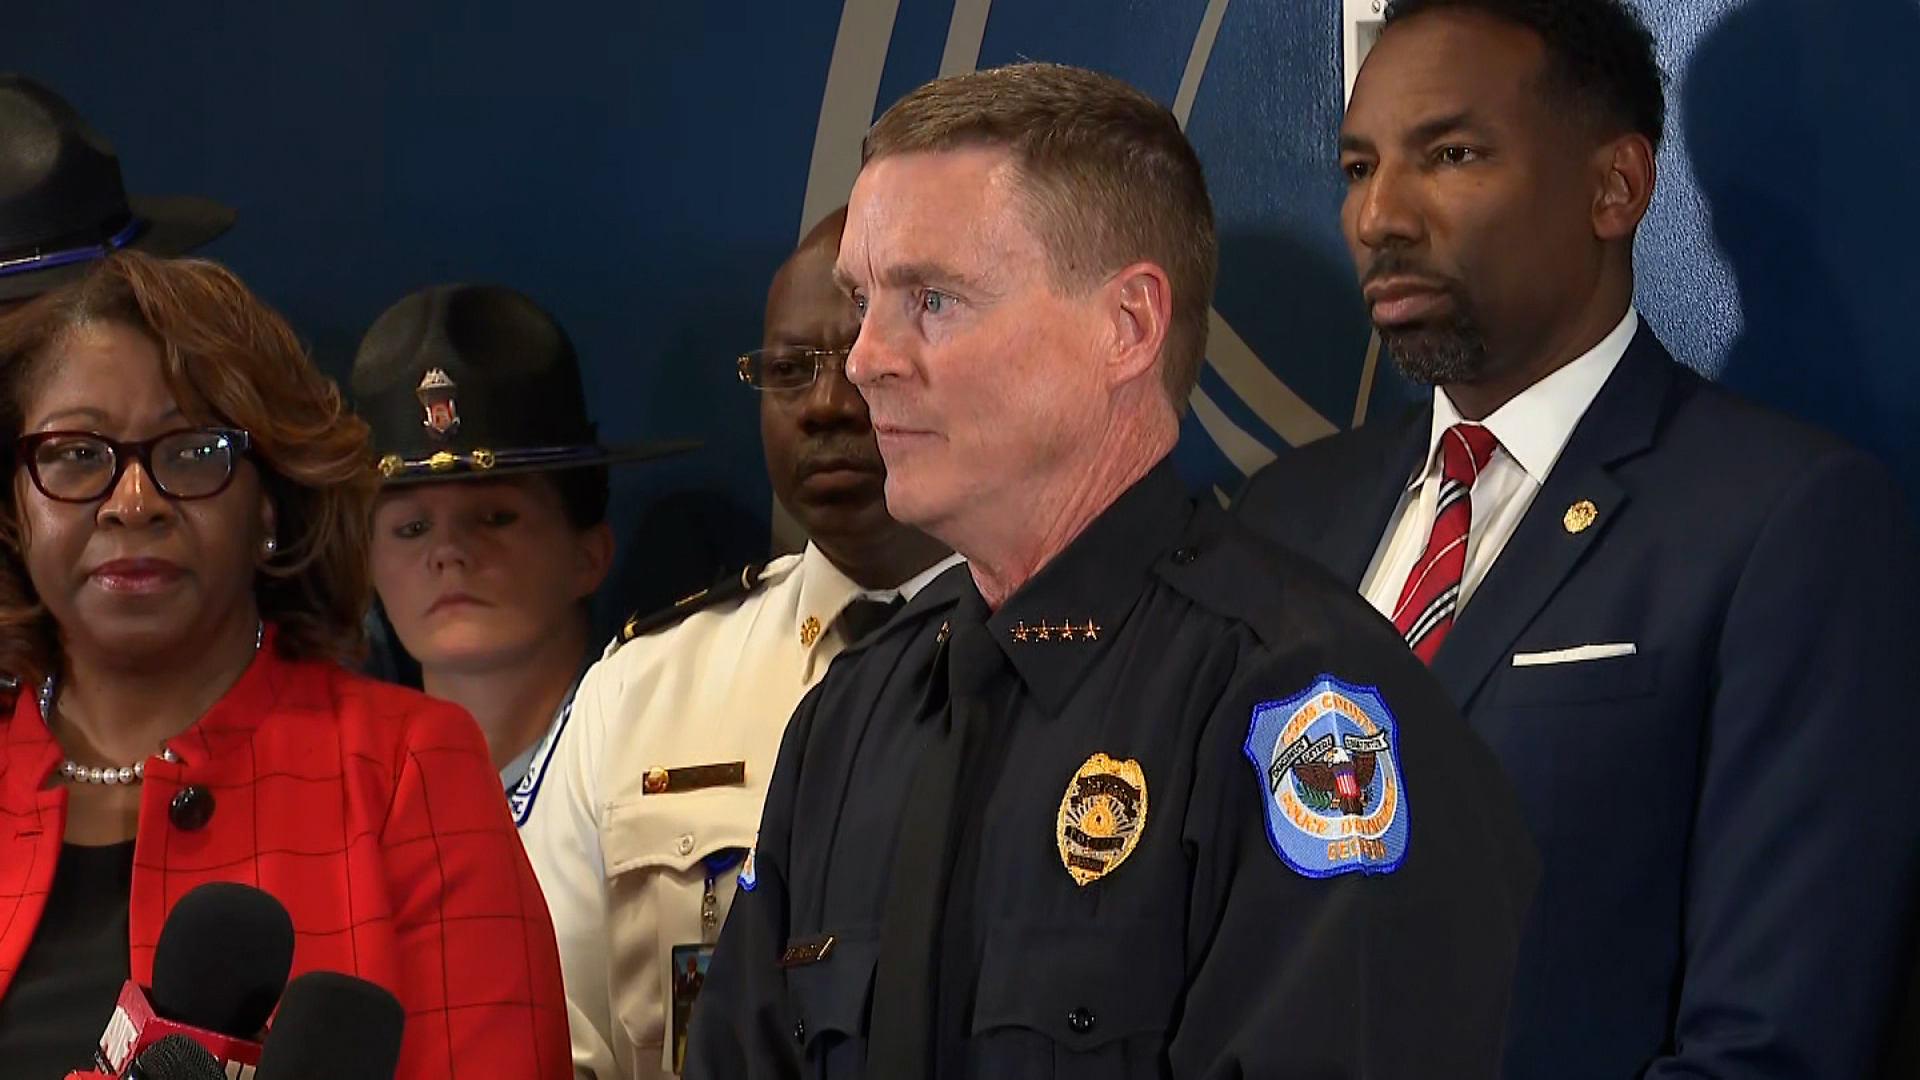 Cobb County PD Chief Chief Stuart VanHoozer speaks during a news conference on Wednesday.